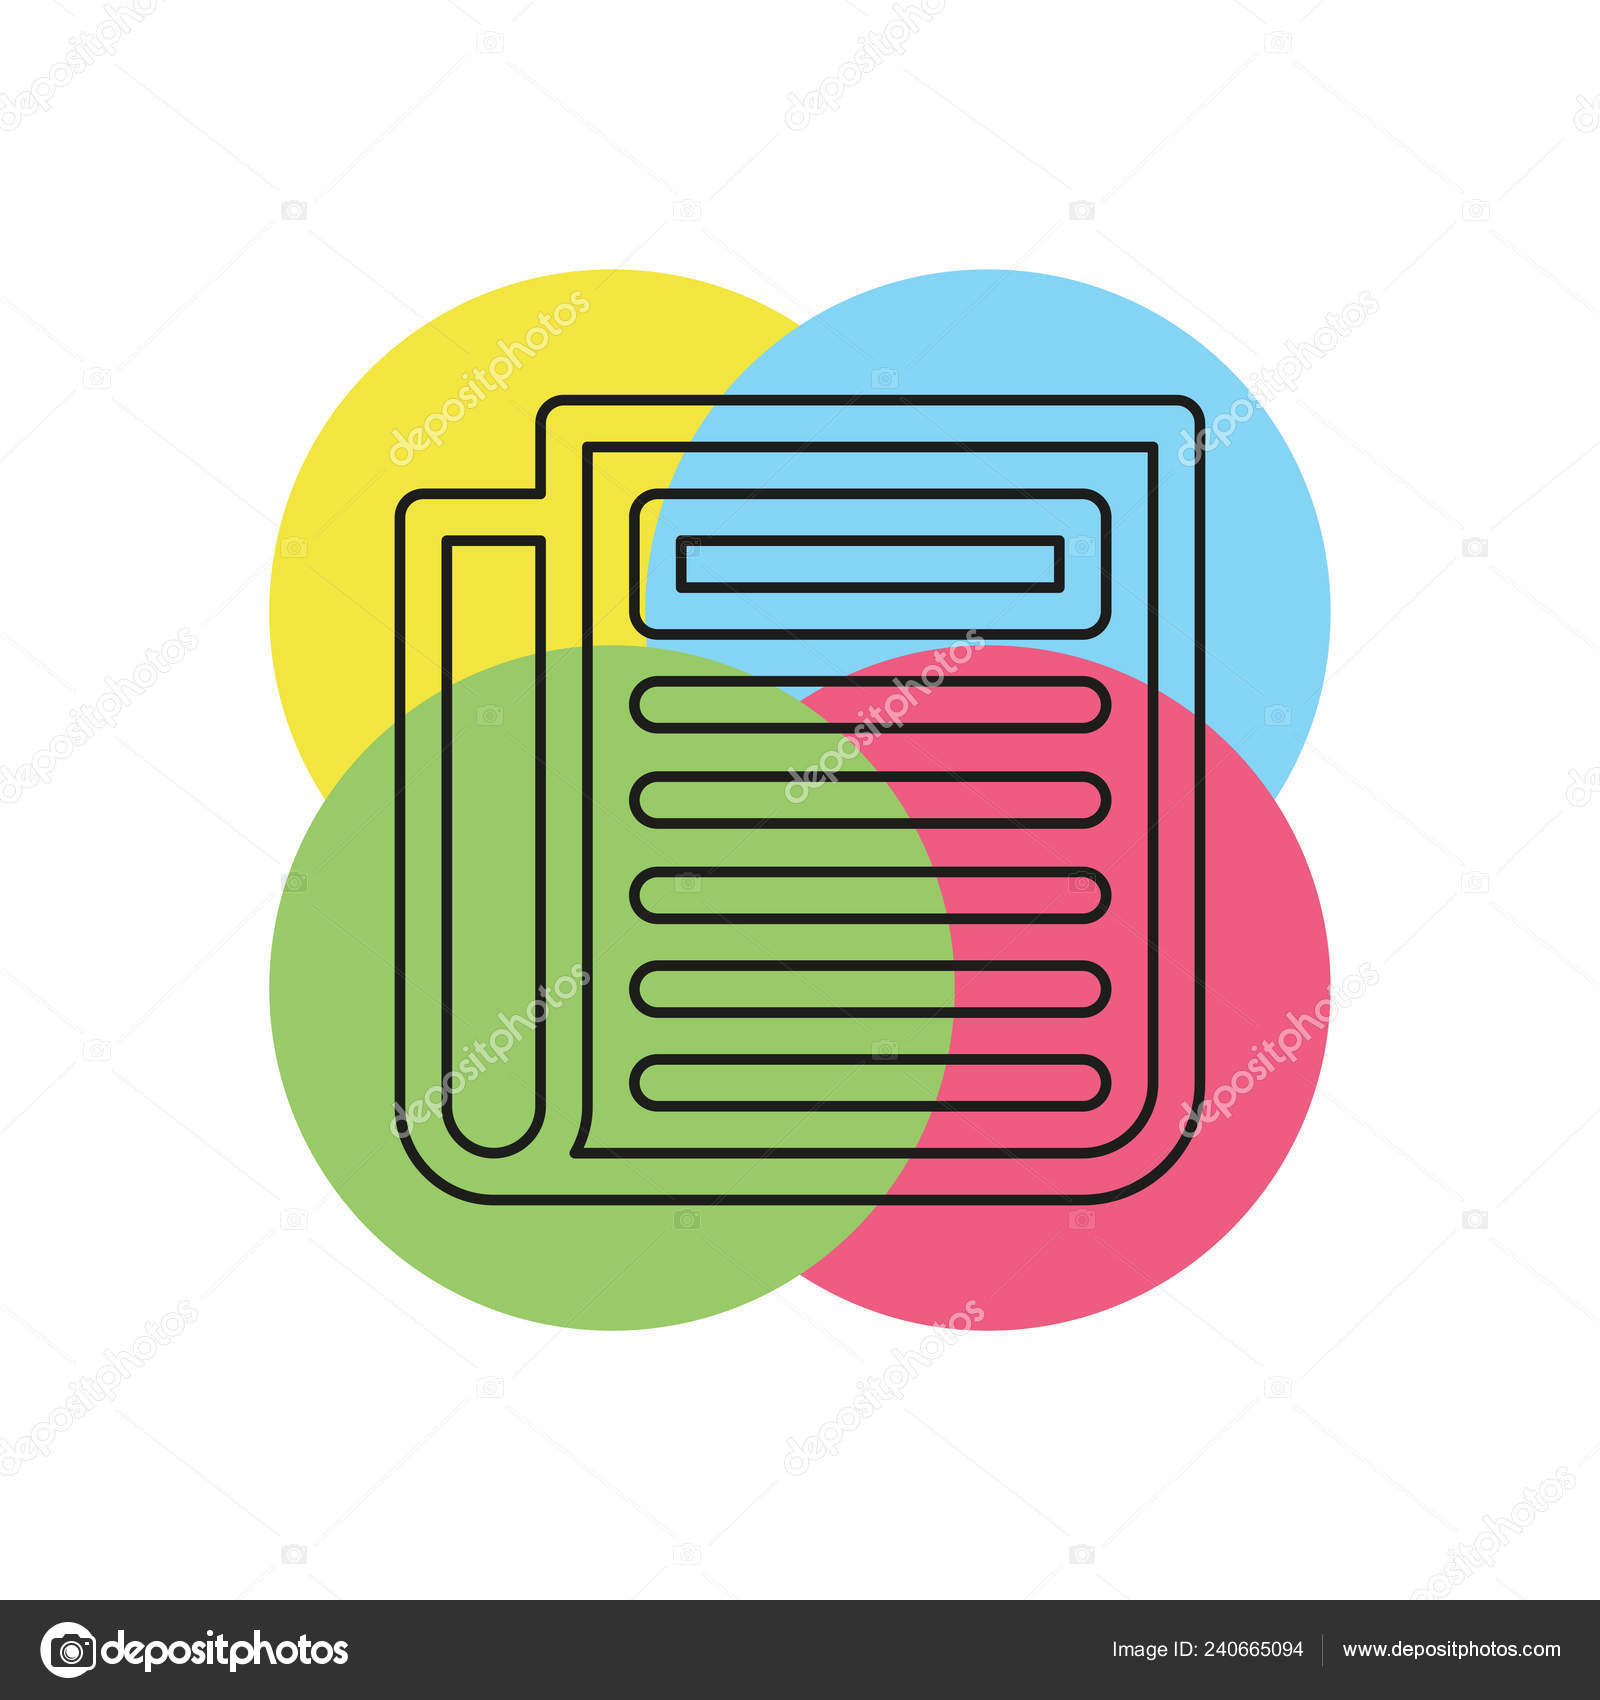 Newspaper Icon Daily Newsletter News Icon Media Publication News Article Vector Image By C Chizhiq Vector Stock